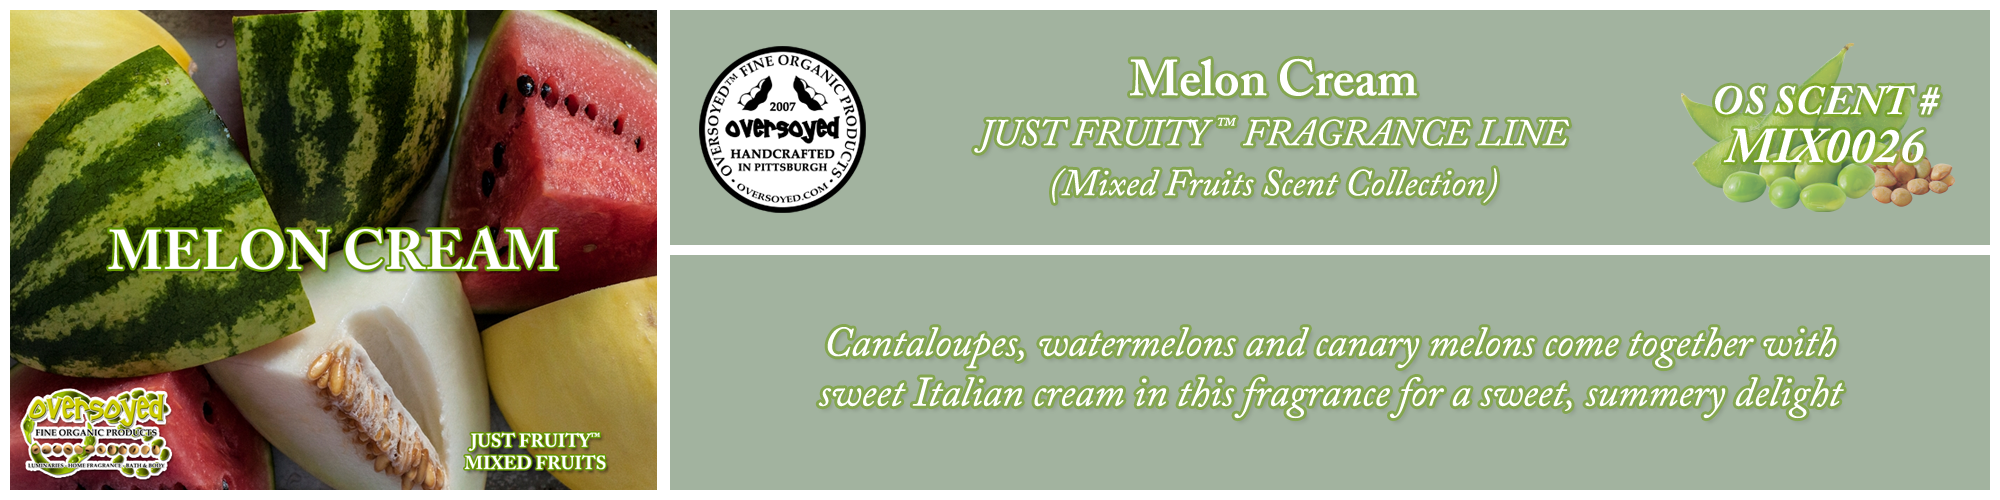 Melon Cream Handcrafted Products Collection